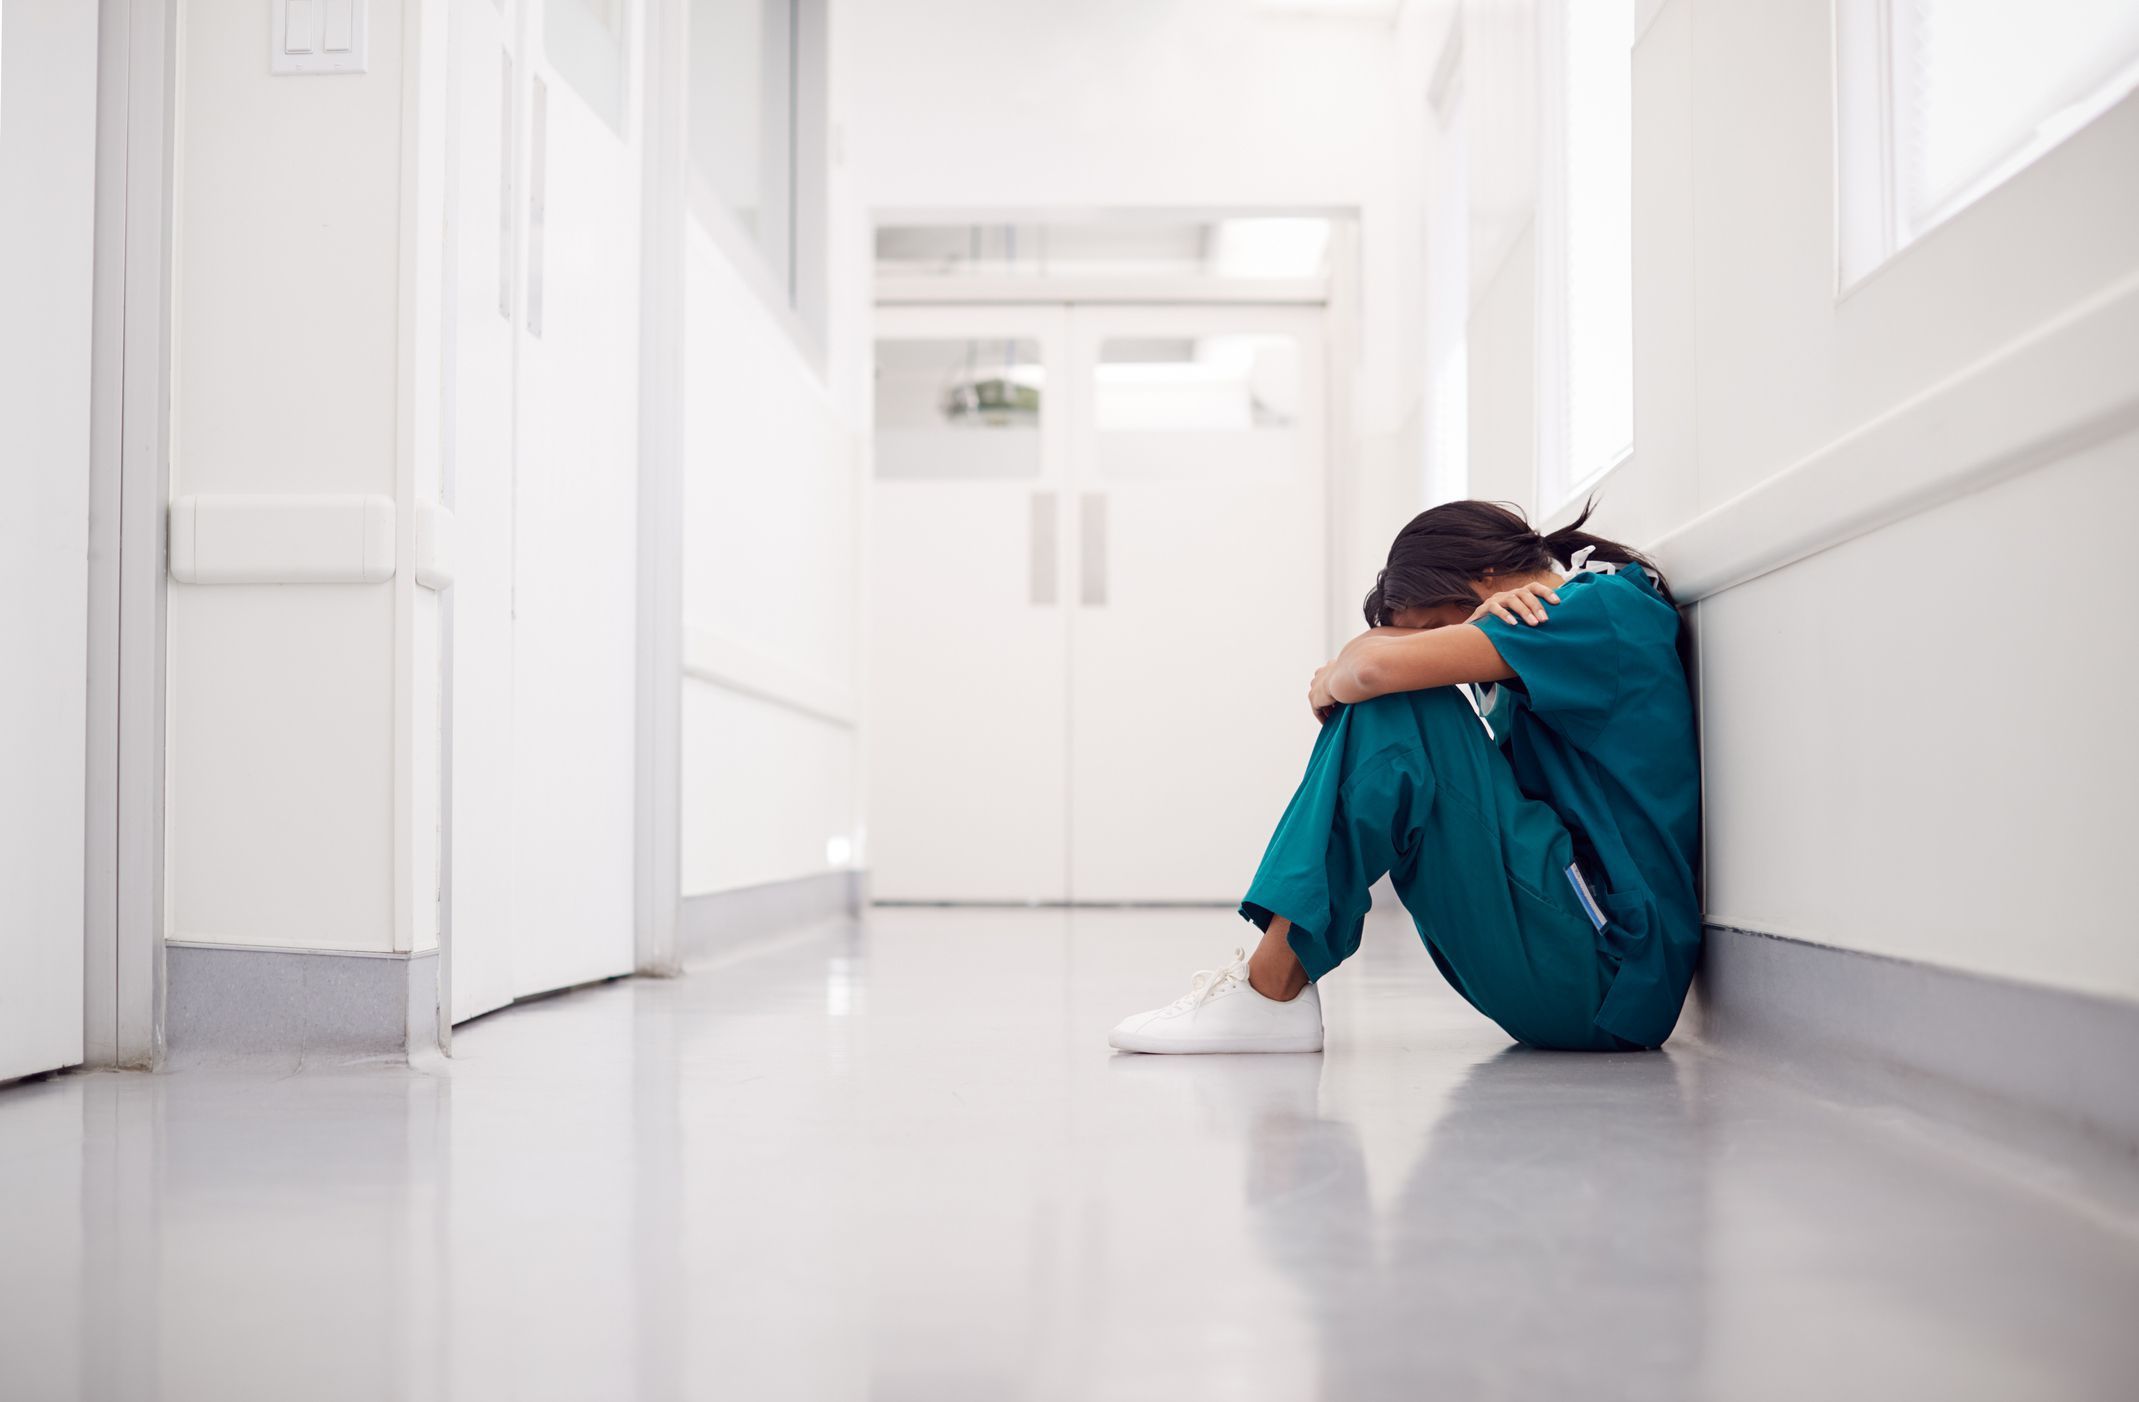 There are no more full-time working child and adolescent psychiatrists in Prince Albert, leading to concerns about adequate mental health care in the community.